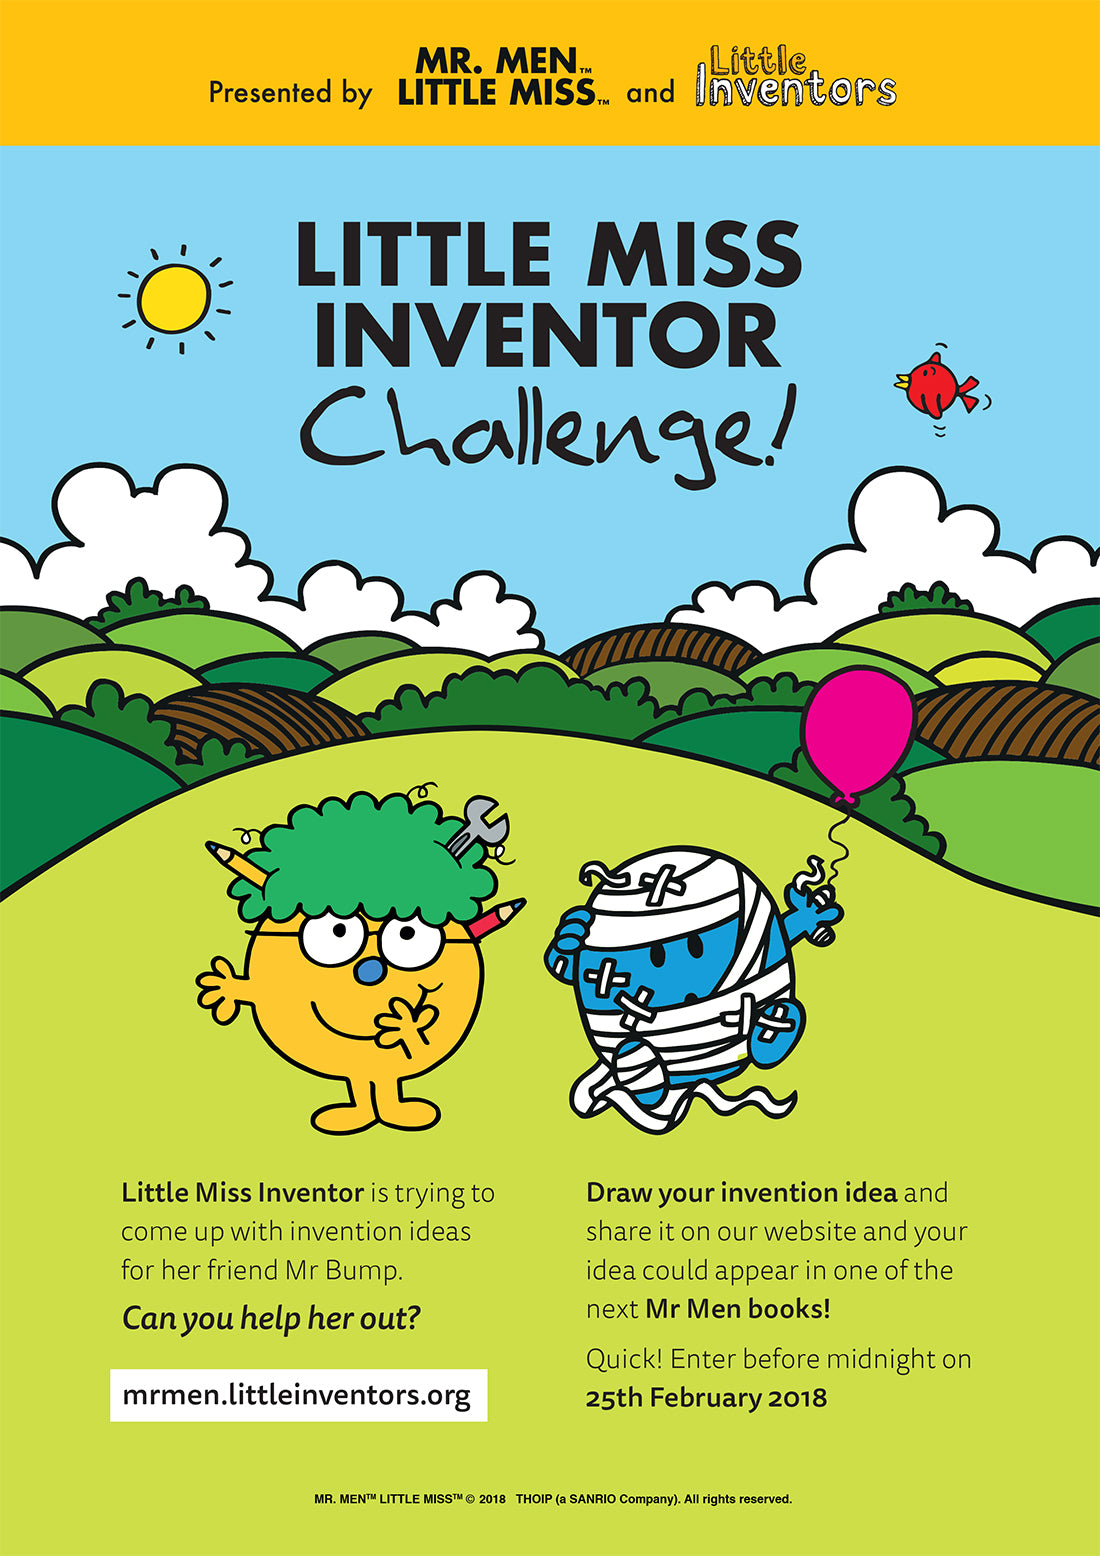 What To Do With Your Invention Ideas -